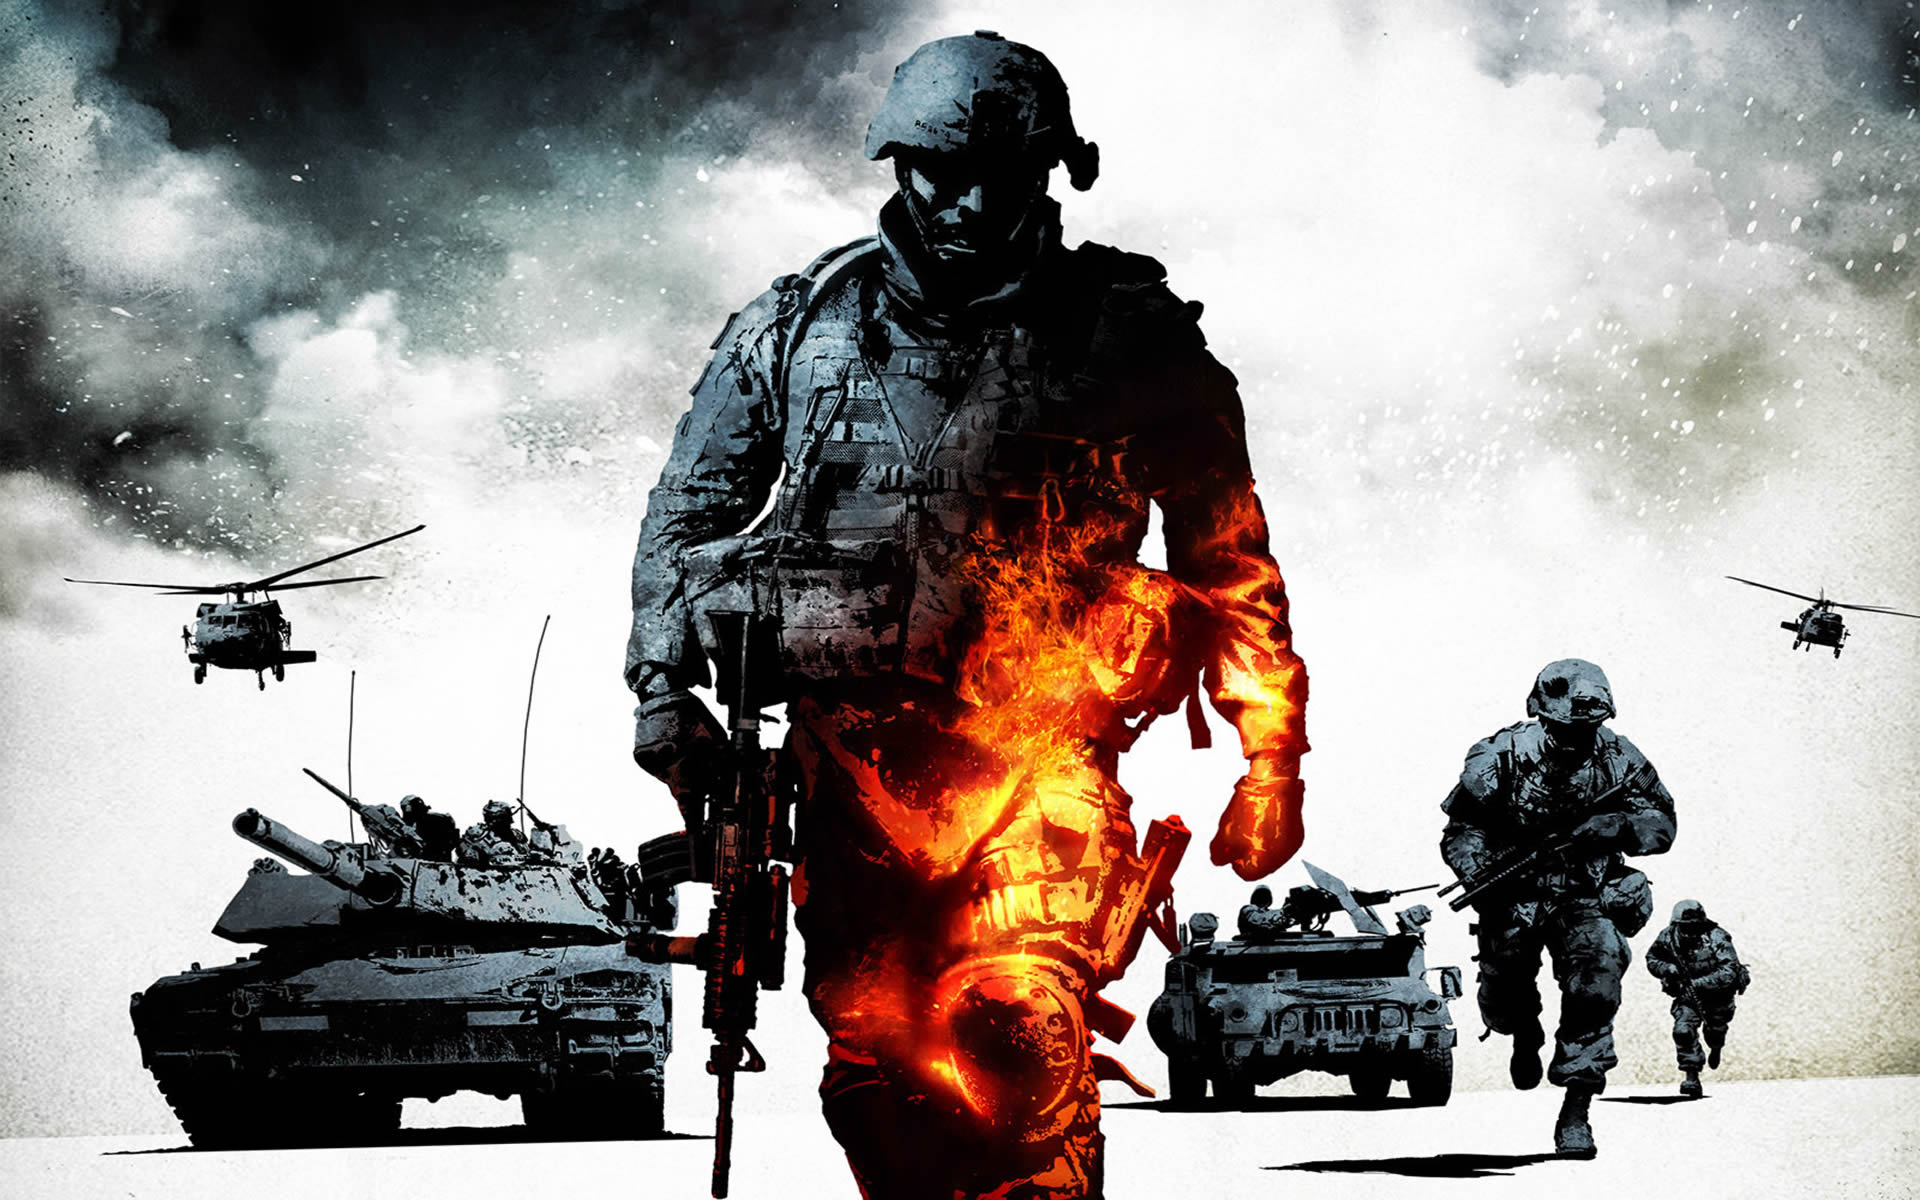 Soldier On Fire Action Games Wallpaper Image Featuring Battlefield